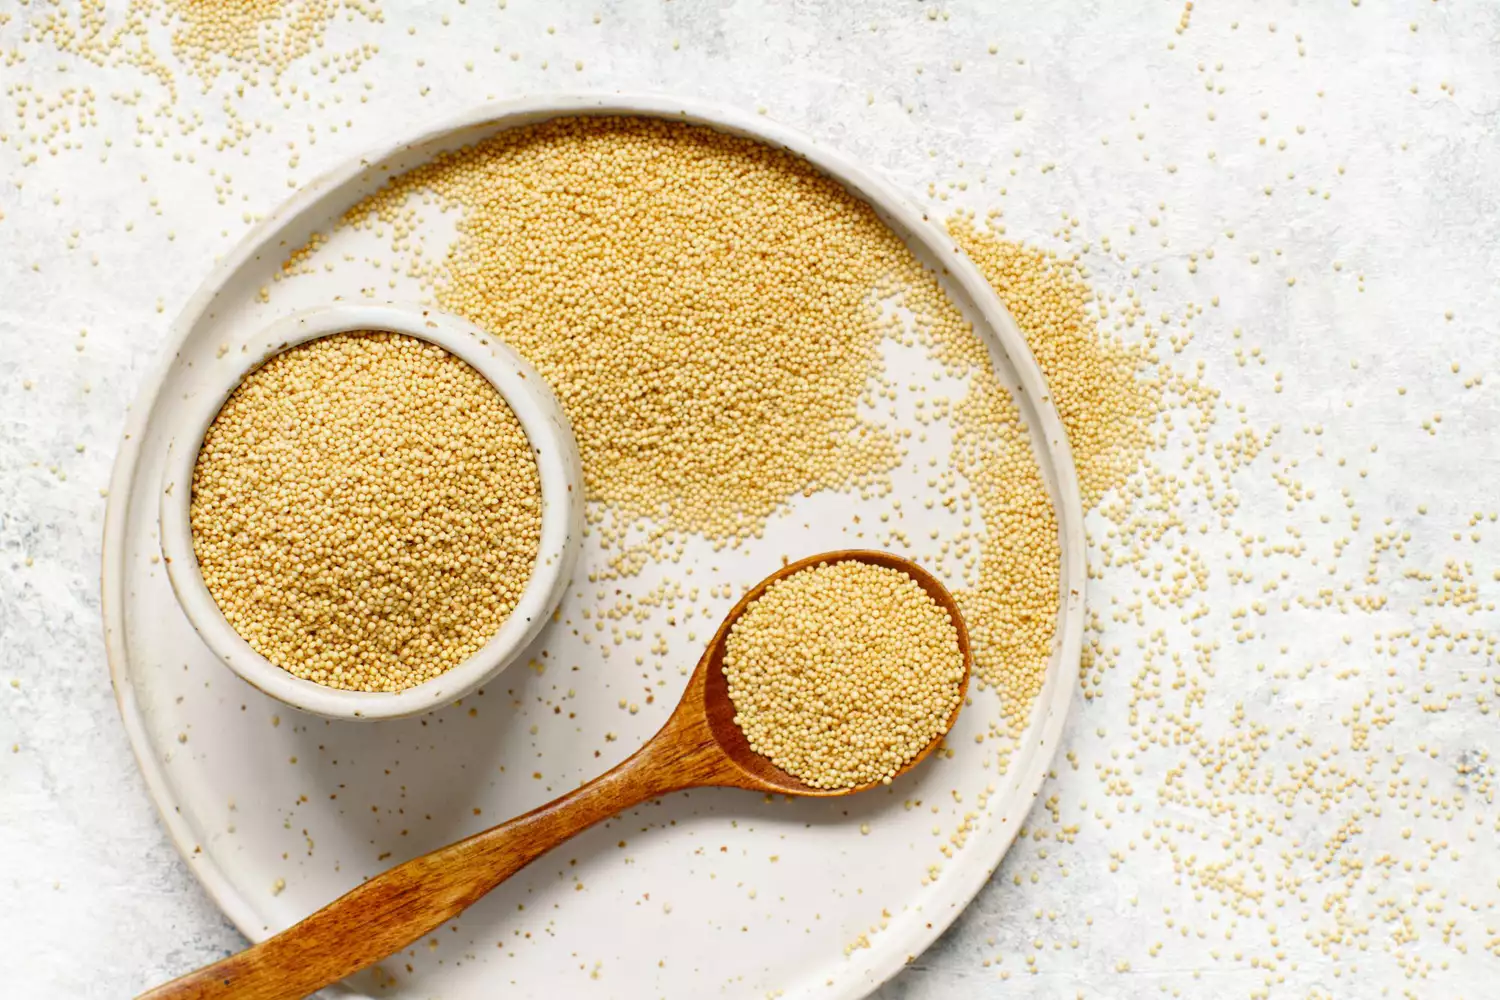 How to Buy, Cook, and Enjoy Amaranth, the Healthy Whole Grain You Should Eat More Of